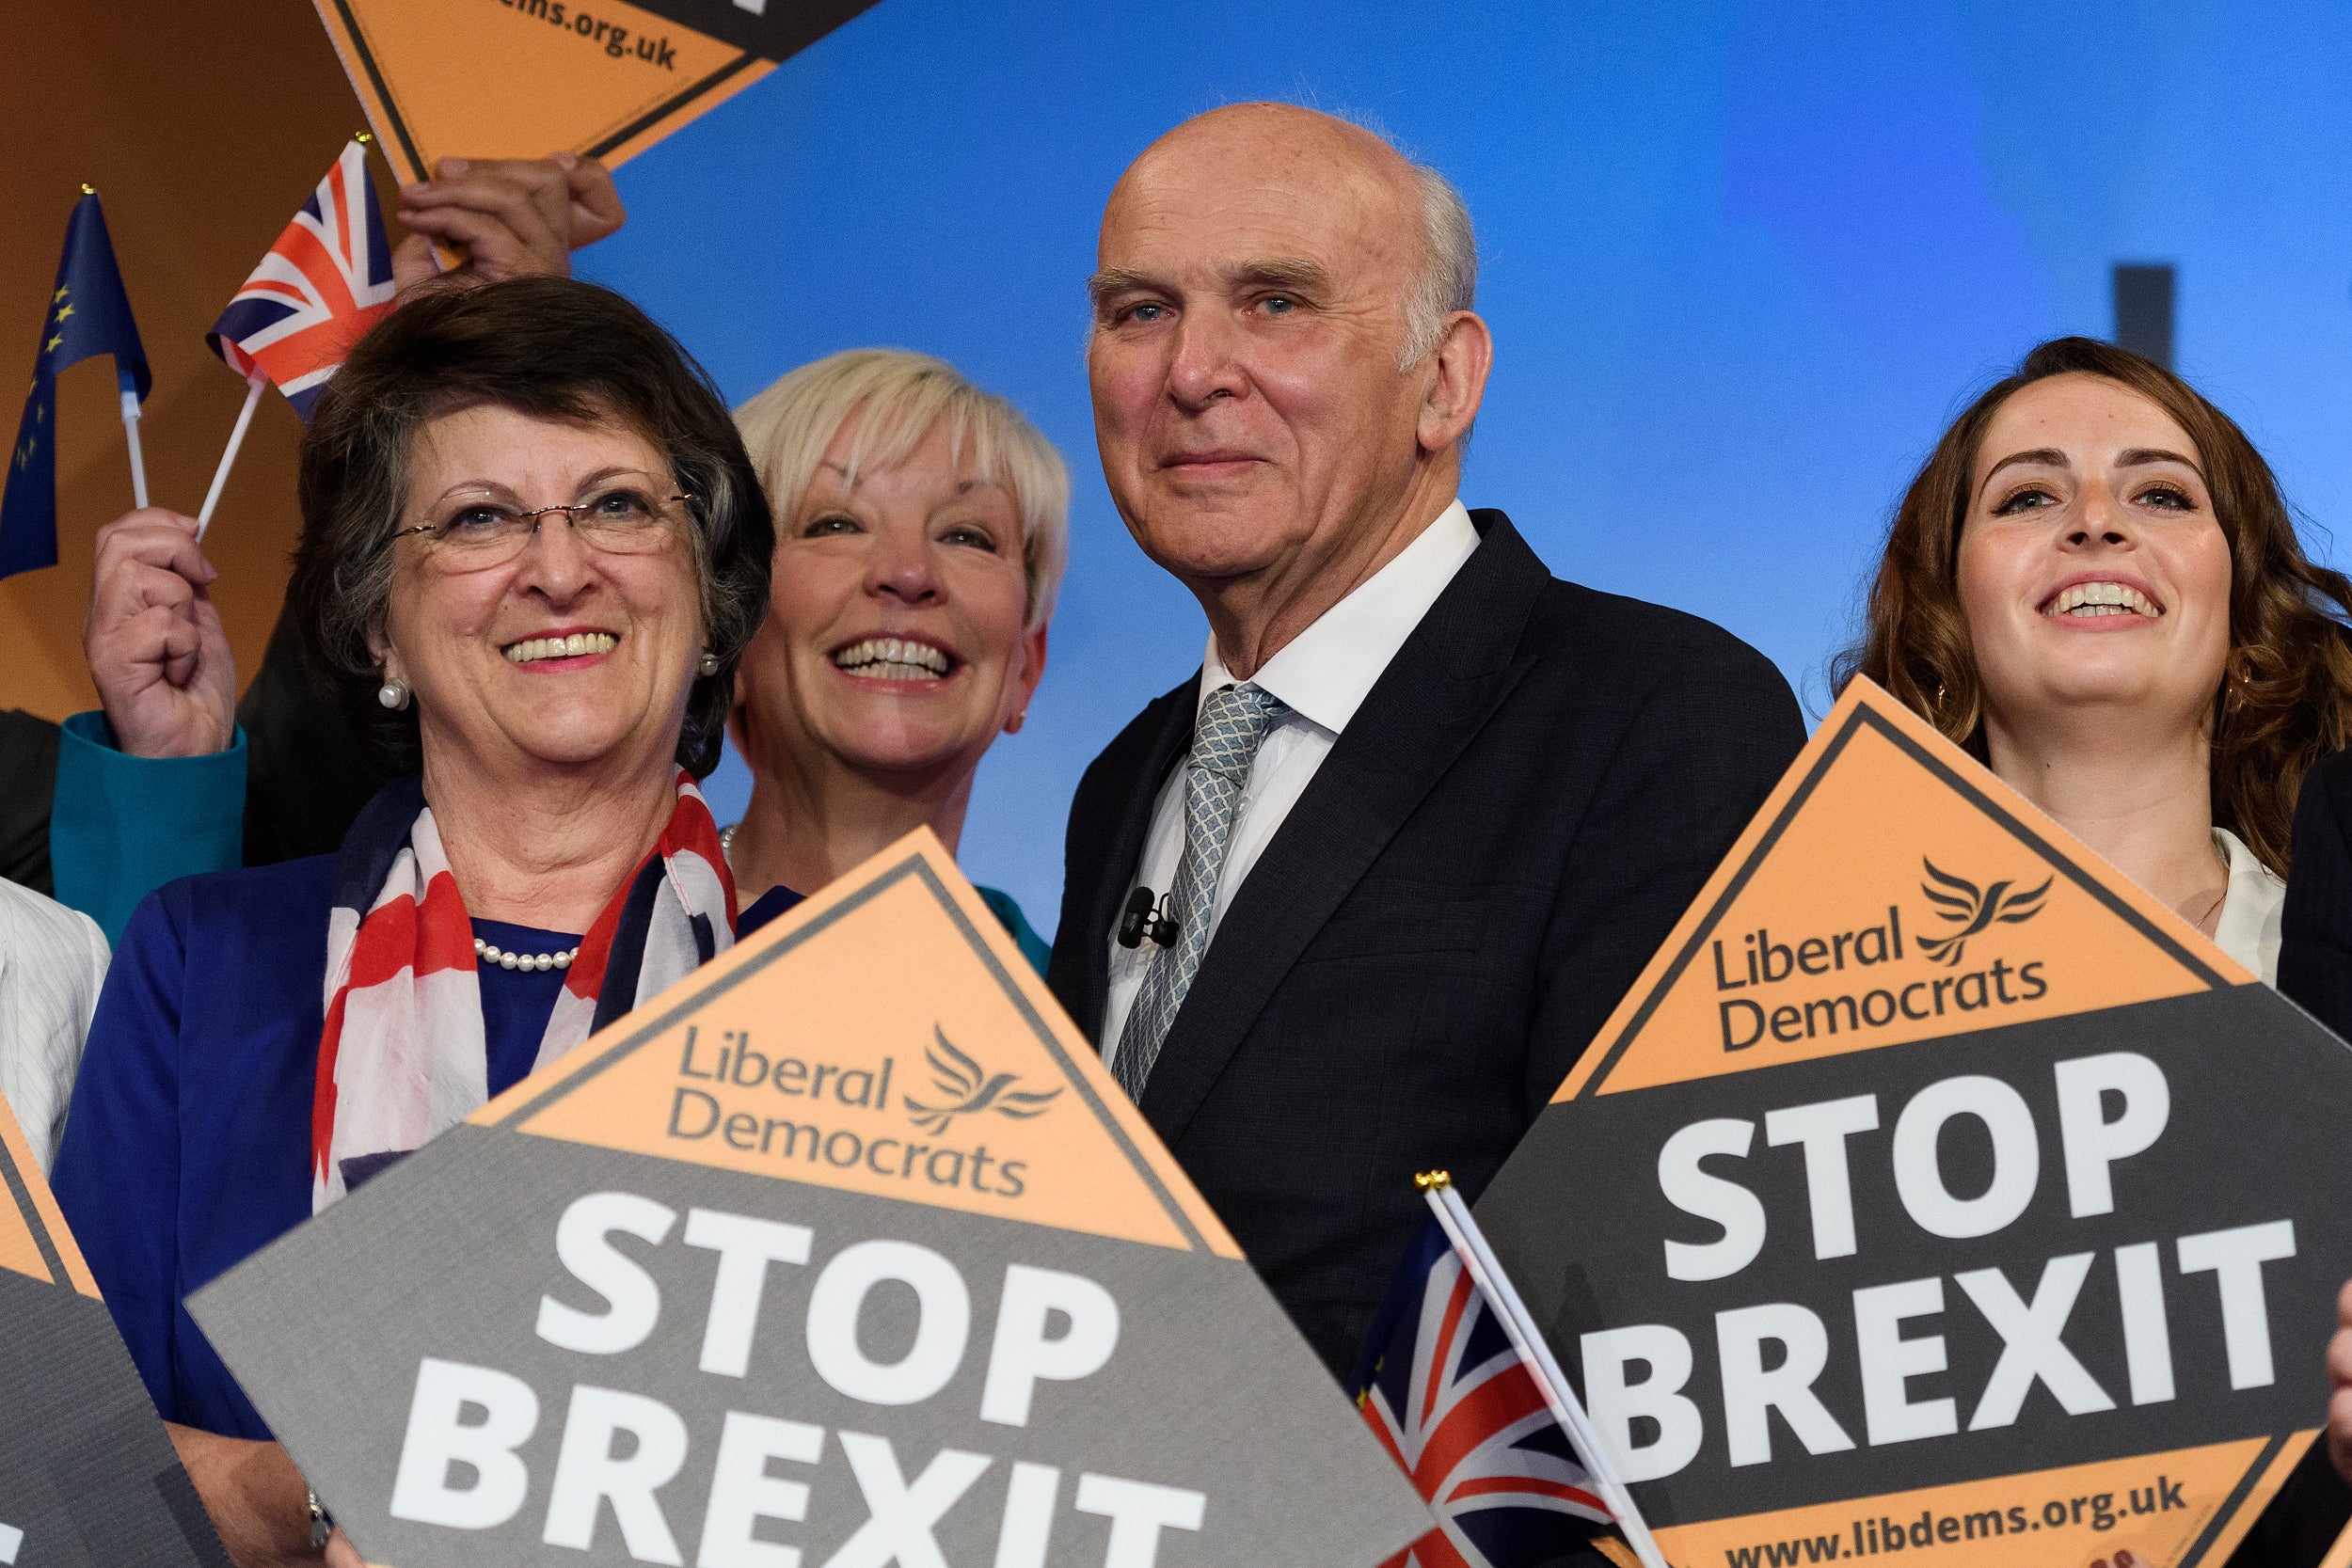 Cable and the Lib Dems campaigning for the European parliament elections (Getty)